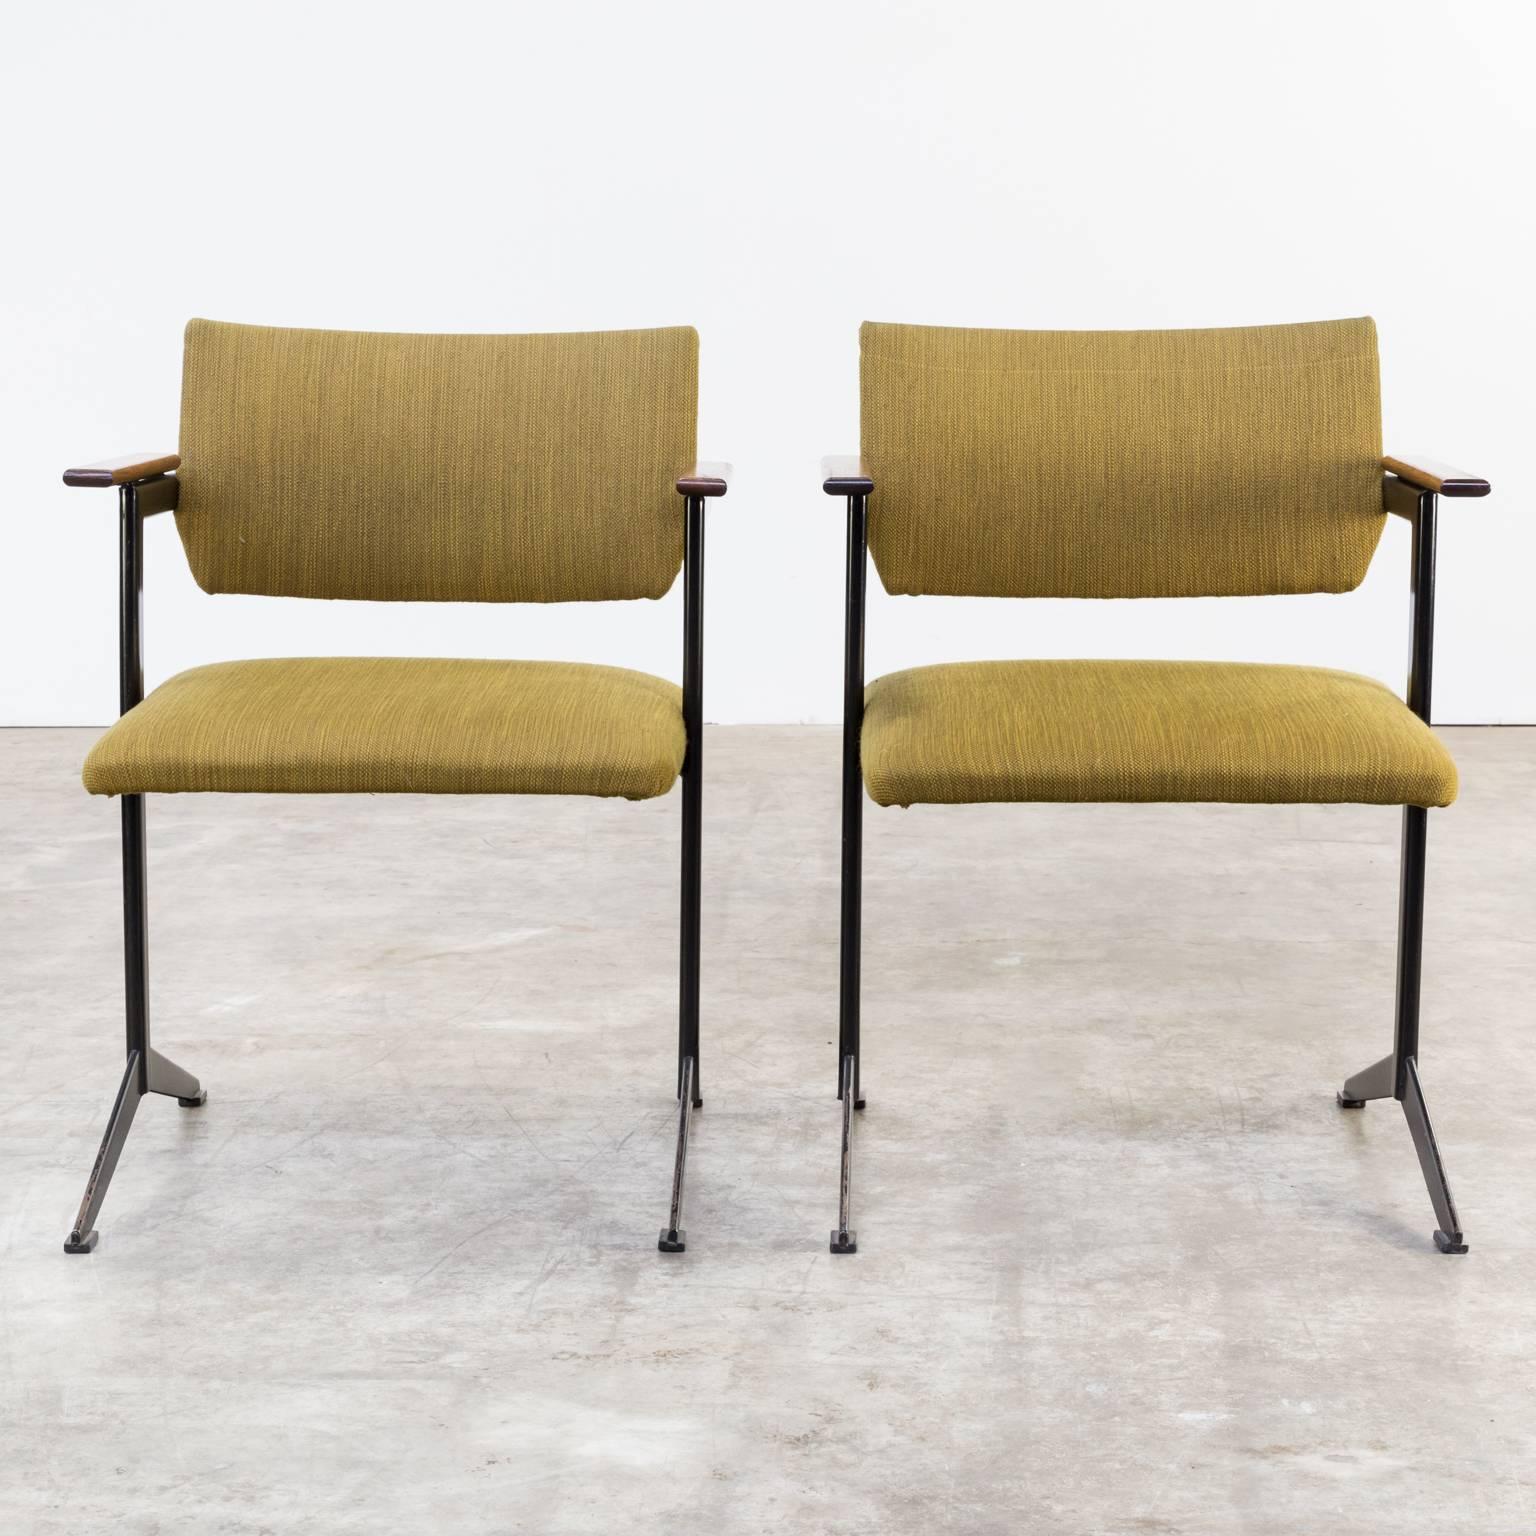 One set of two 1960s Friso Kramer ‘Ariadne series’ chairs for Auping. Metal, teak armrests, fabric. Both chairs in good condition, wear consistent with age and use. Dimensions: 60.5cm (W) x 60cm (D) x 82cm (H) seat h 47cm.